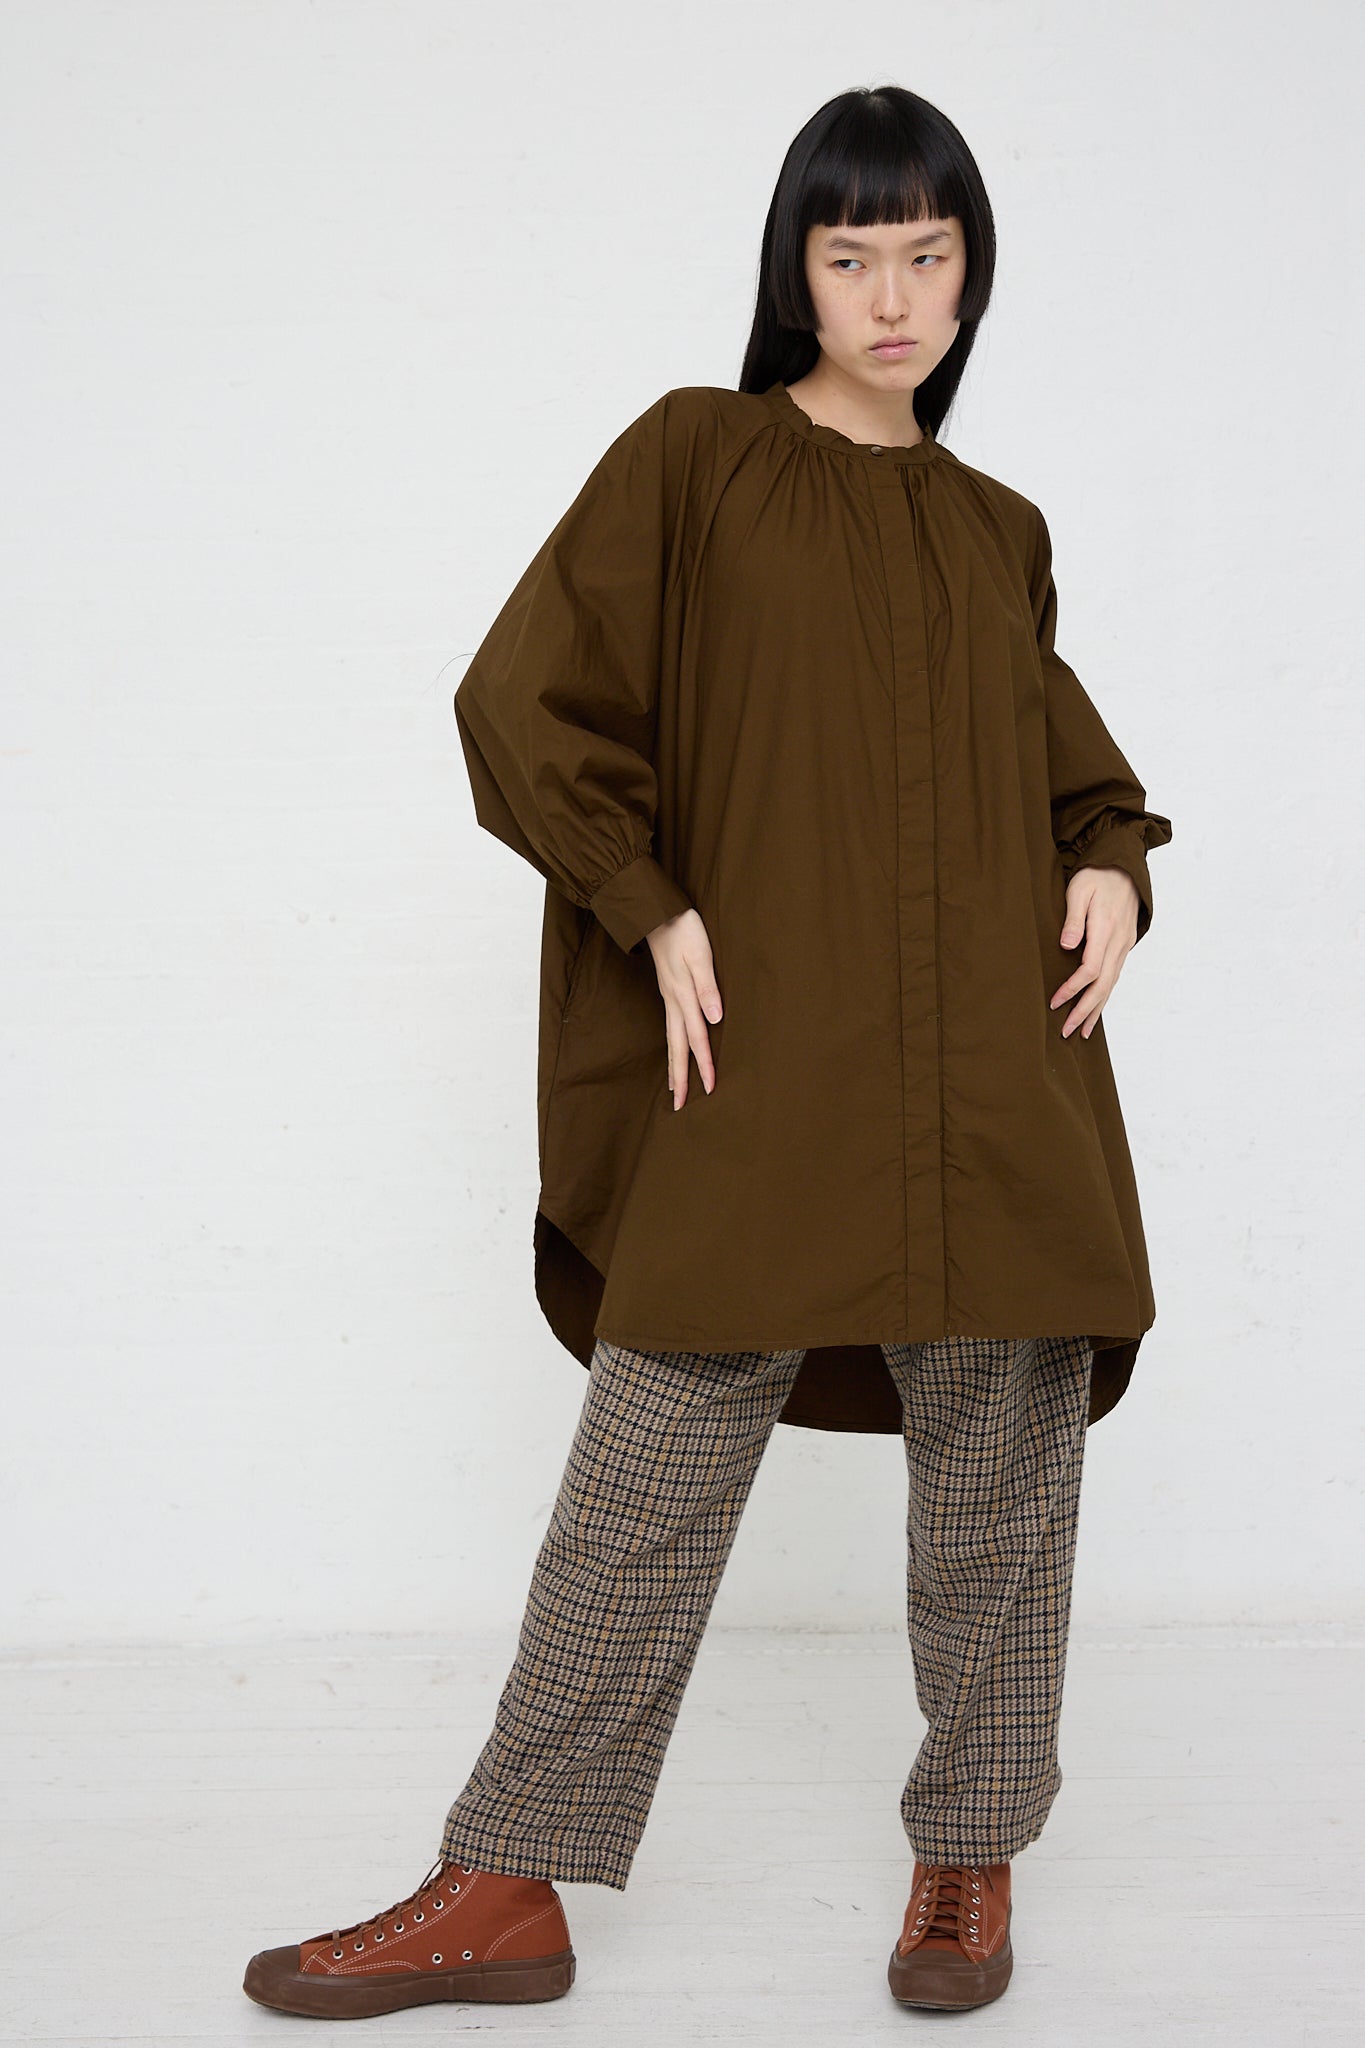 The model is wearing an Ichi Woven Cotton Shirt in Seal Brown. Full length and front view.